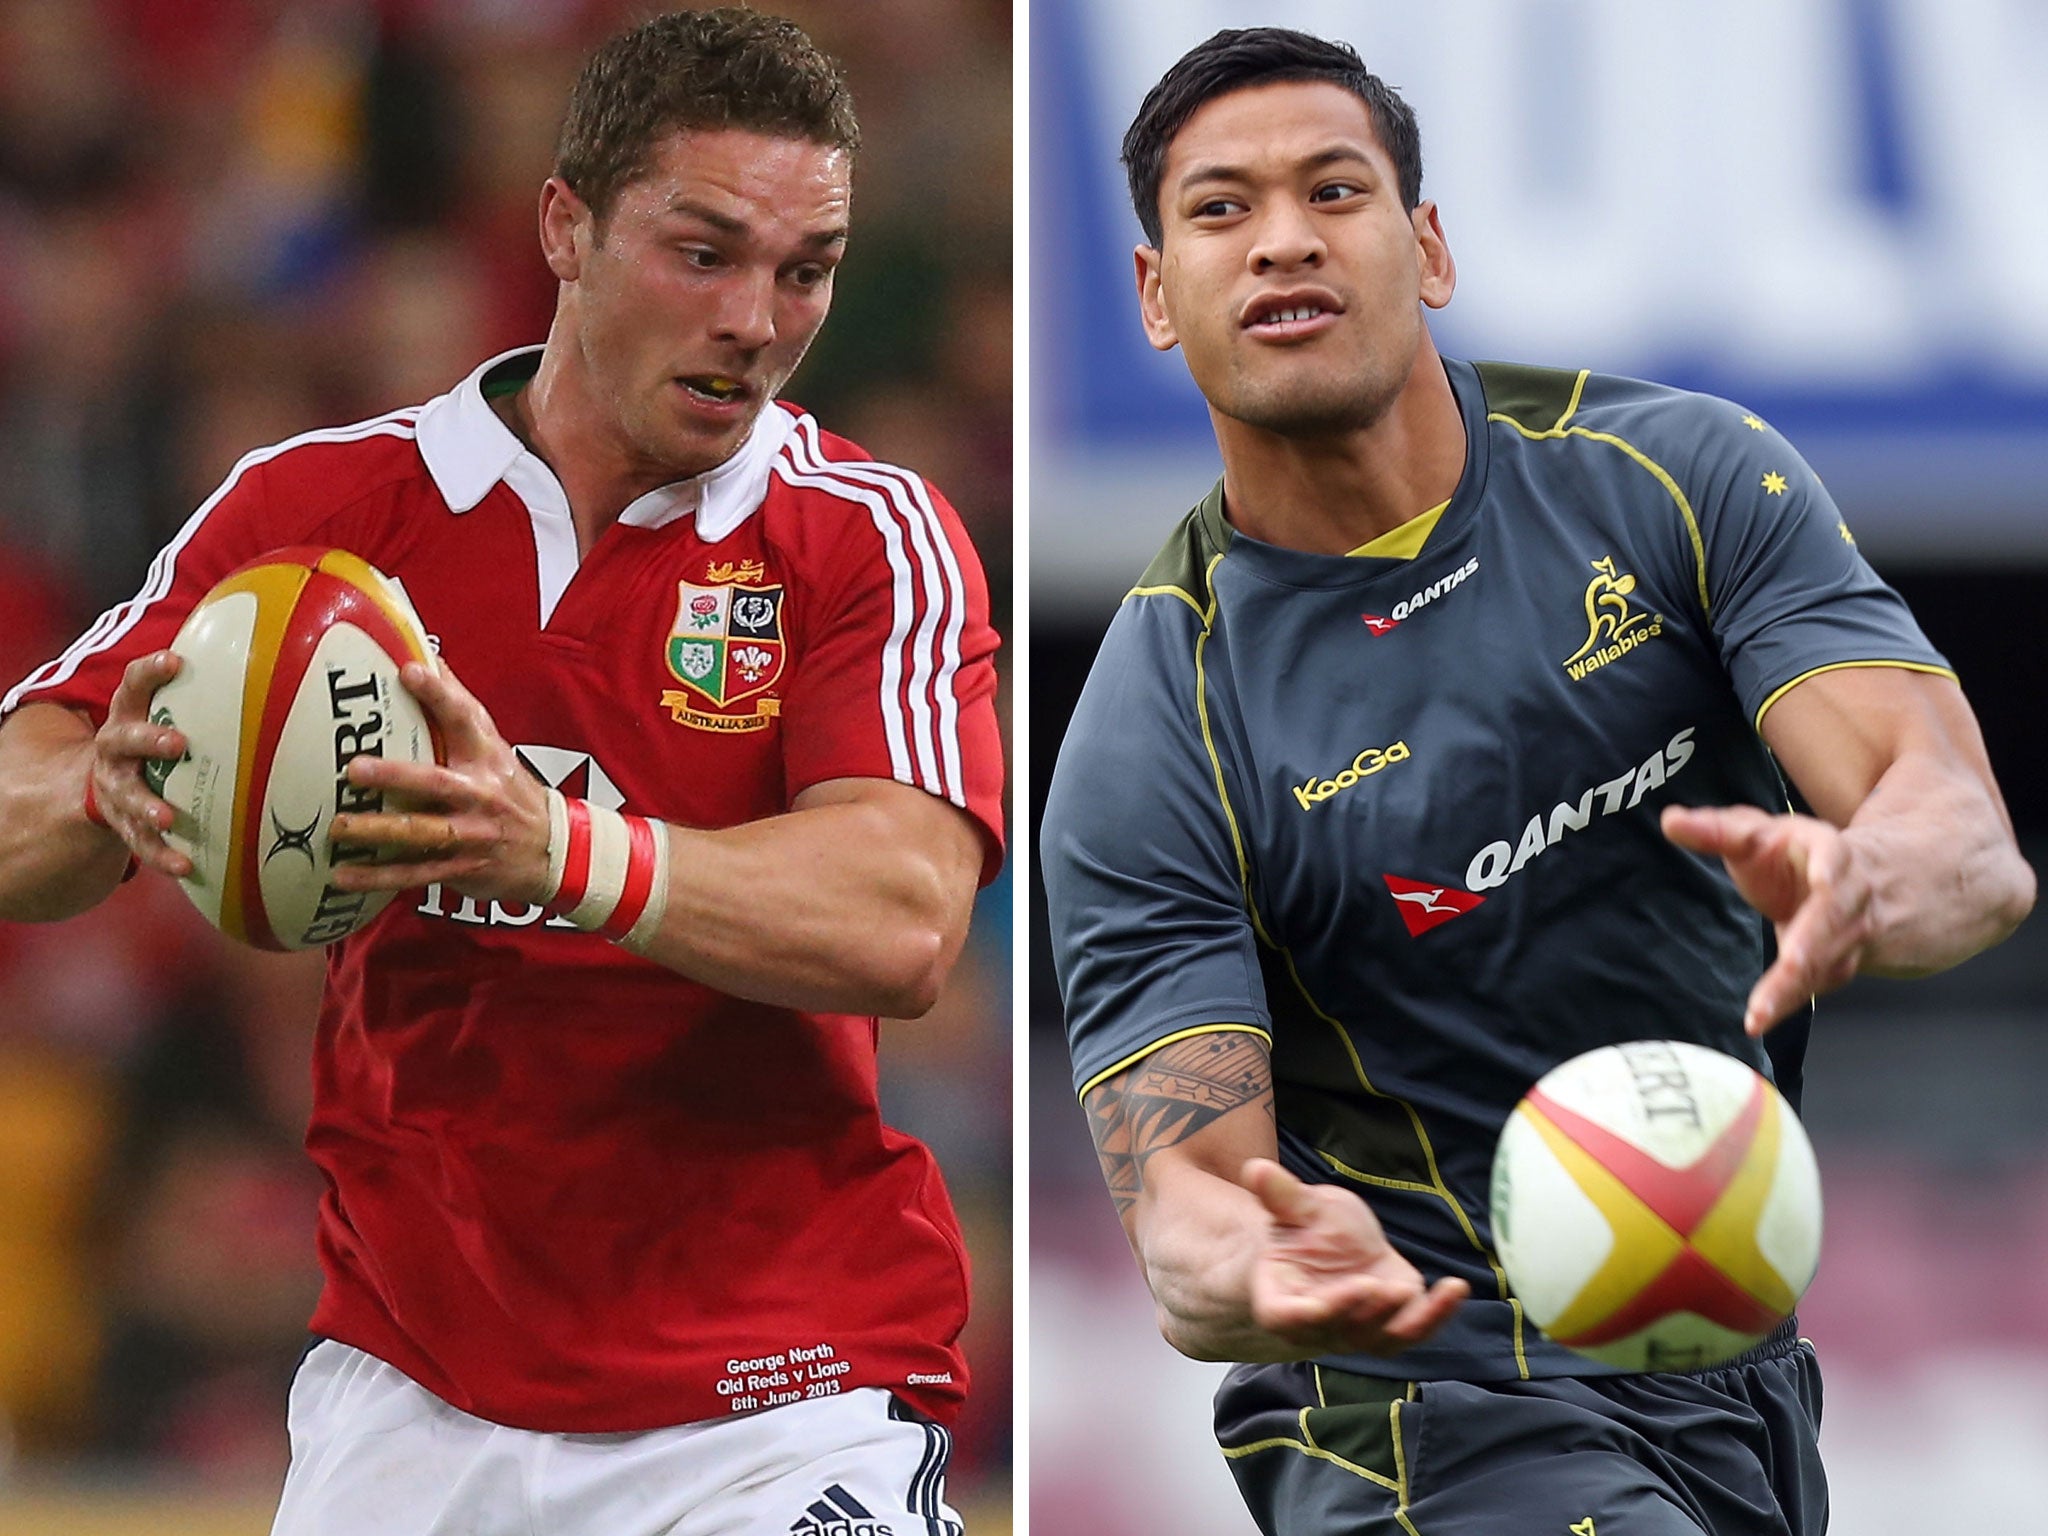 The battle between George North and Israel Folau will be key to the first Test